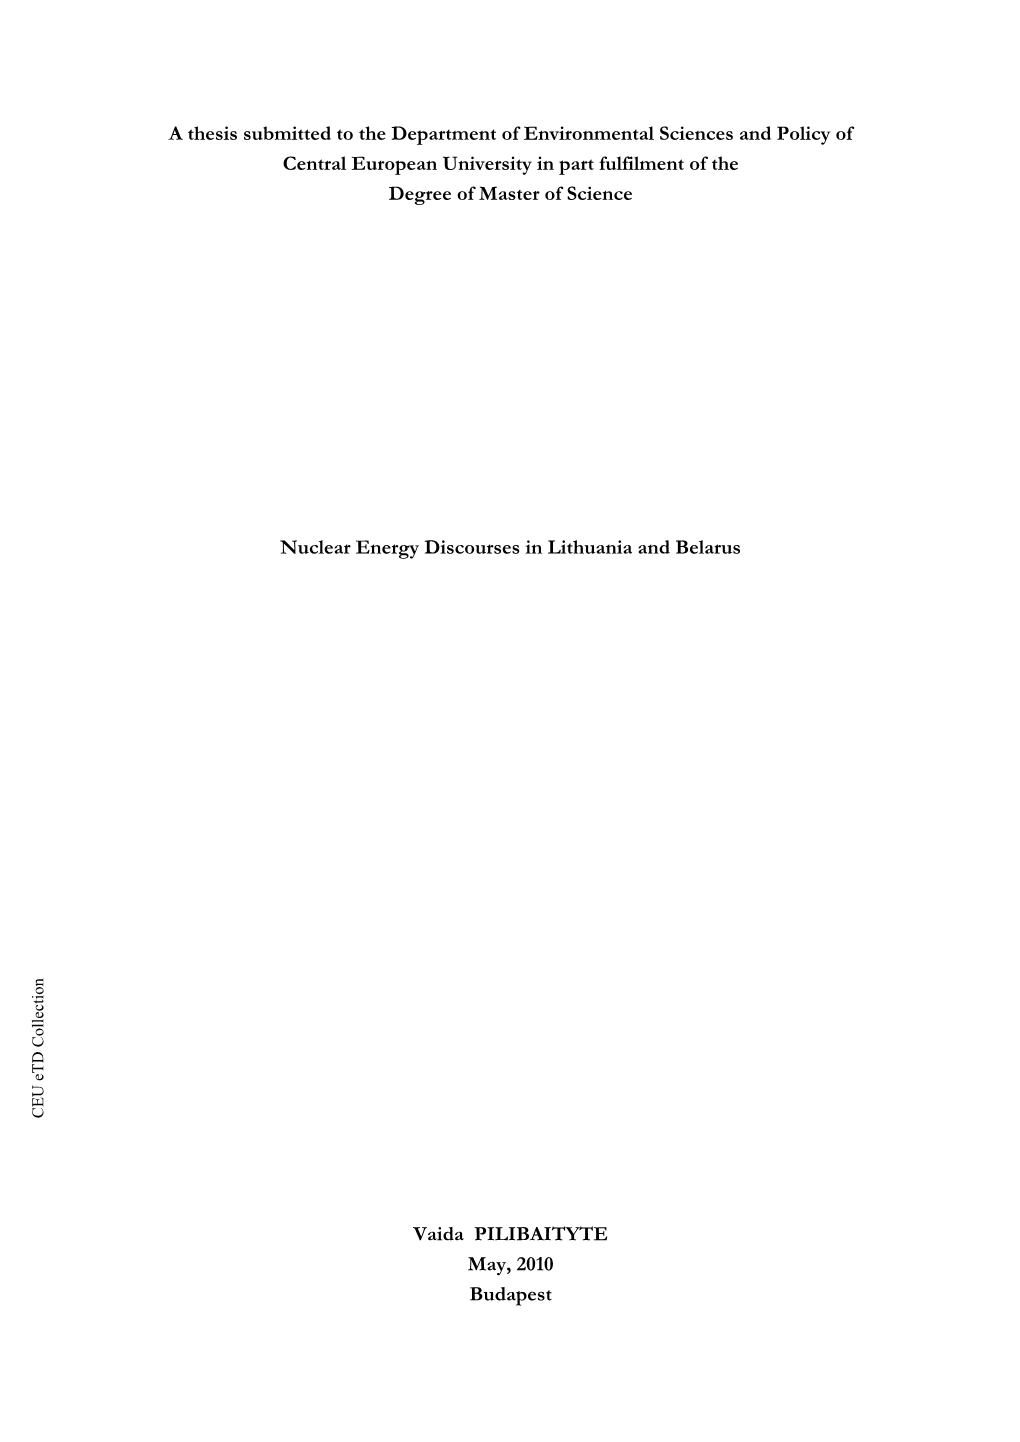 A Thesis Submitted to the Department of Environmental Sciences And